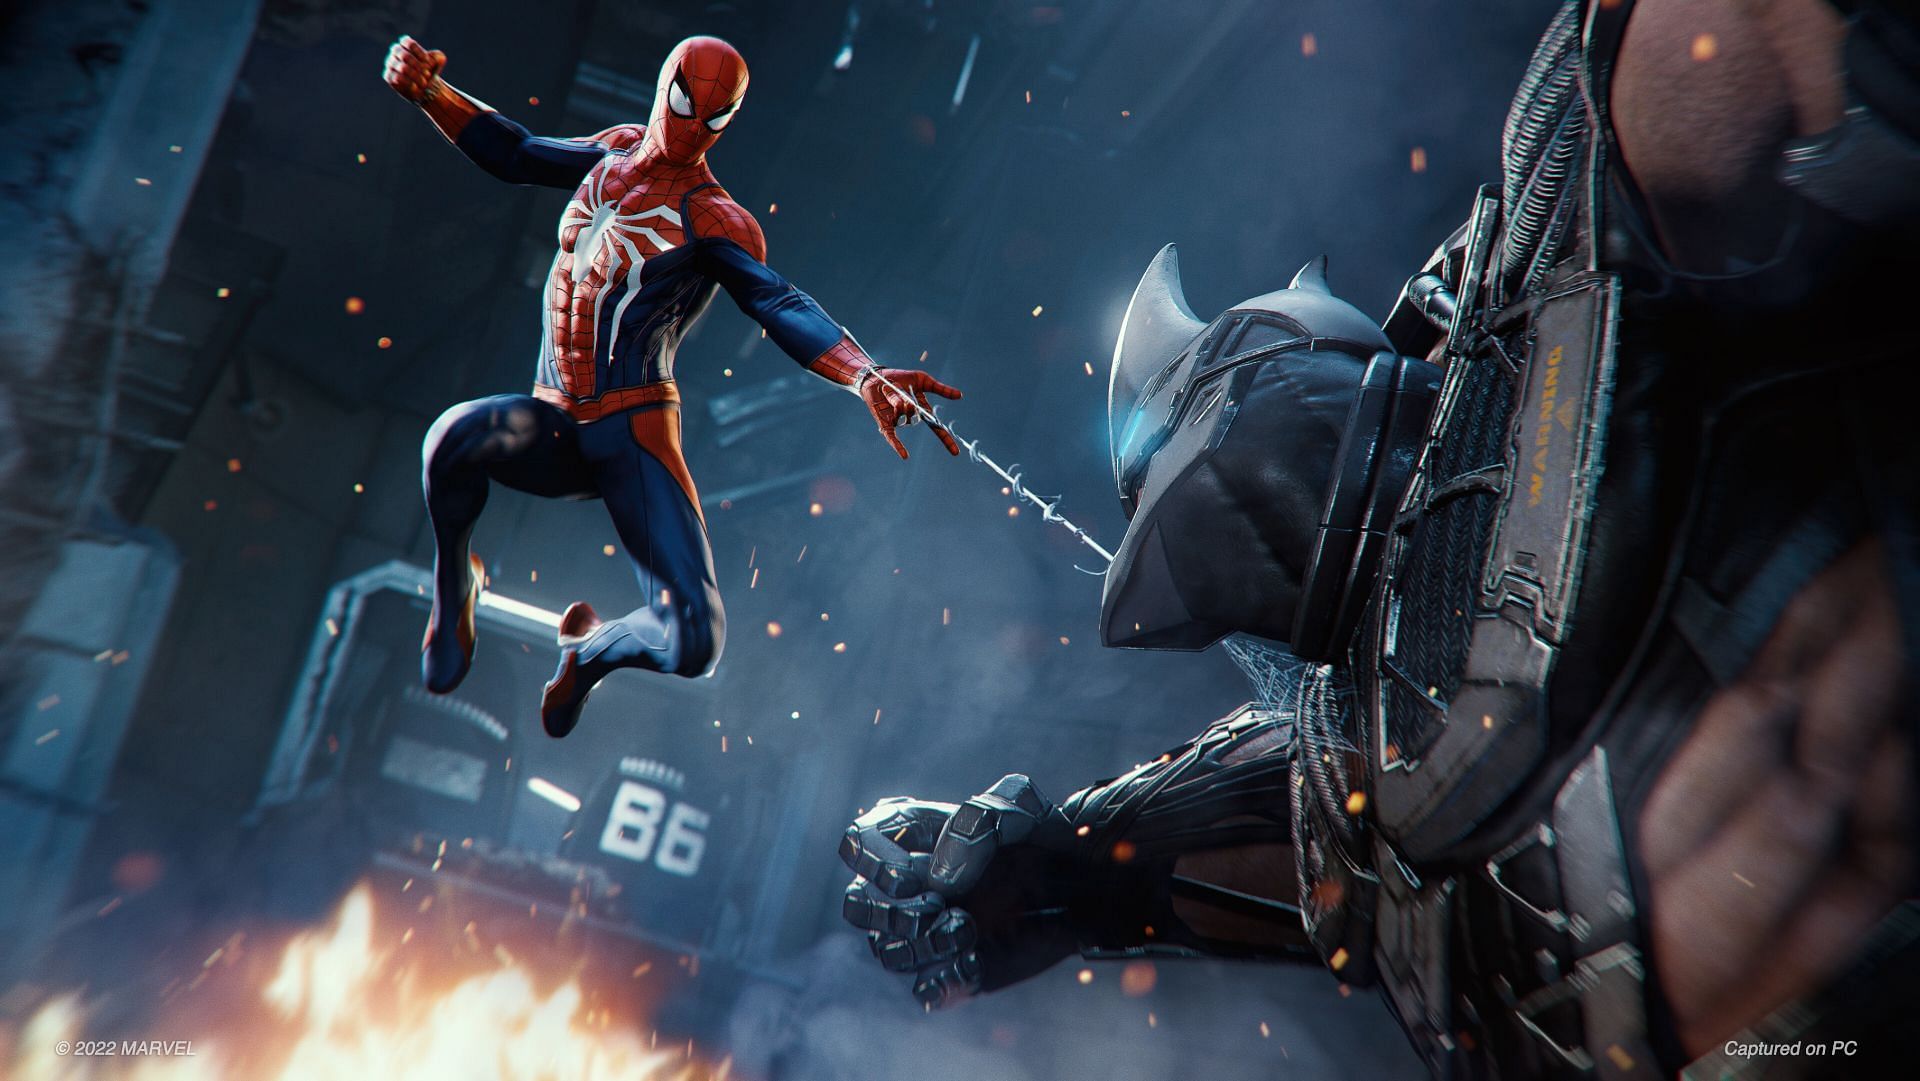 Batman: Arkham Knight' returns to PC with some lingering issues